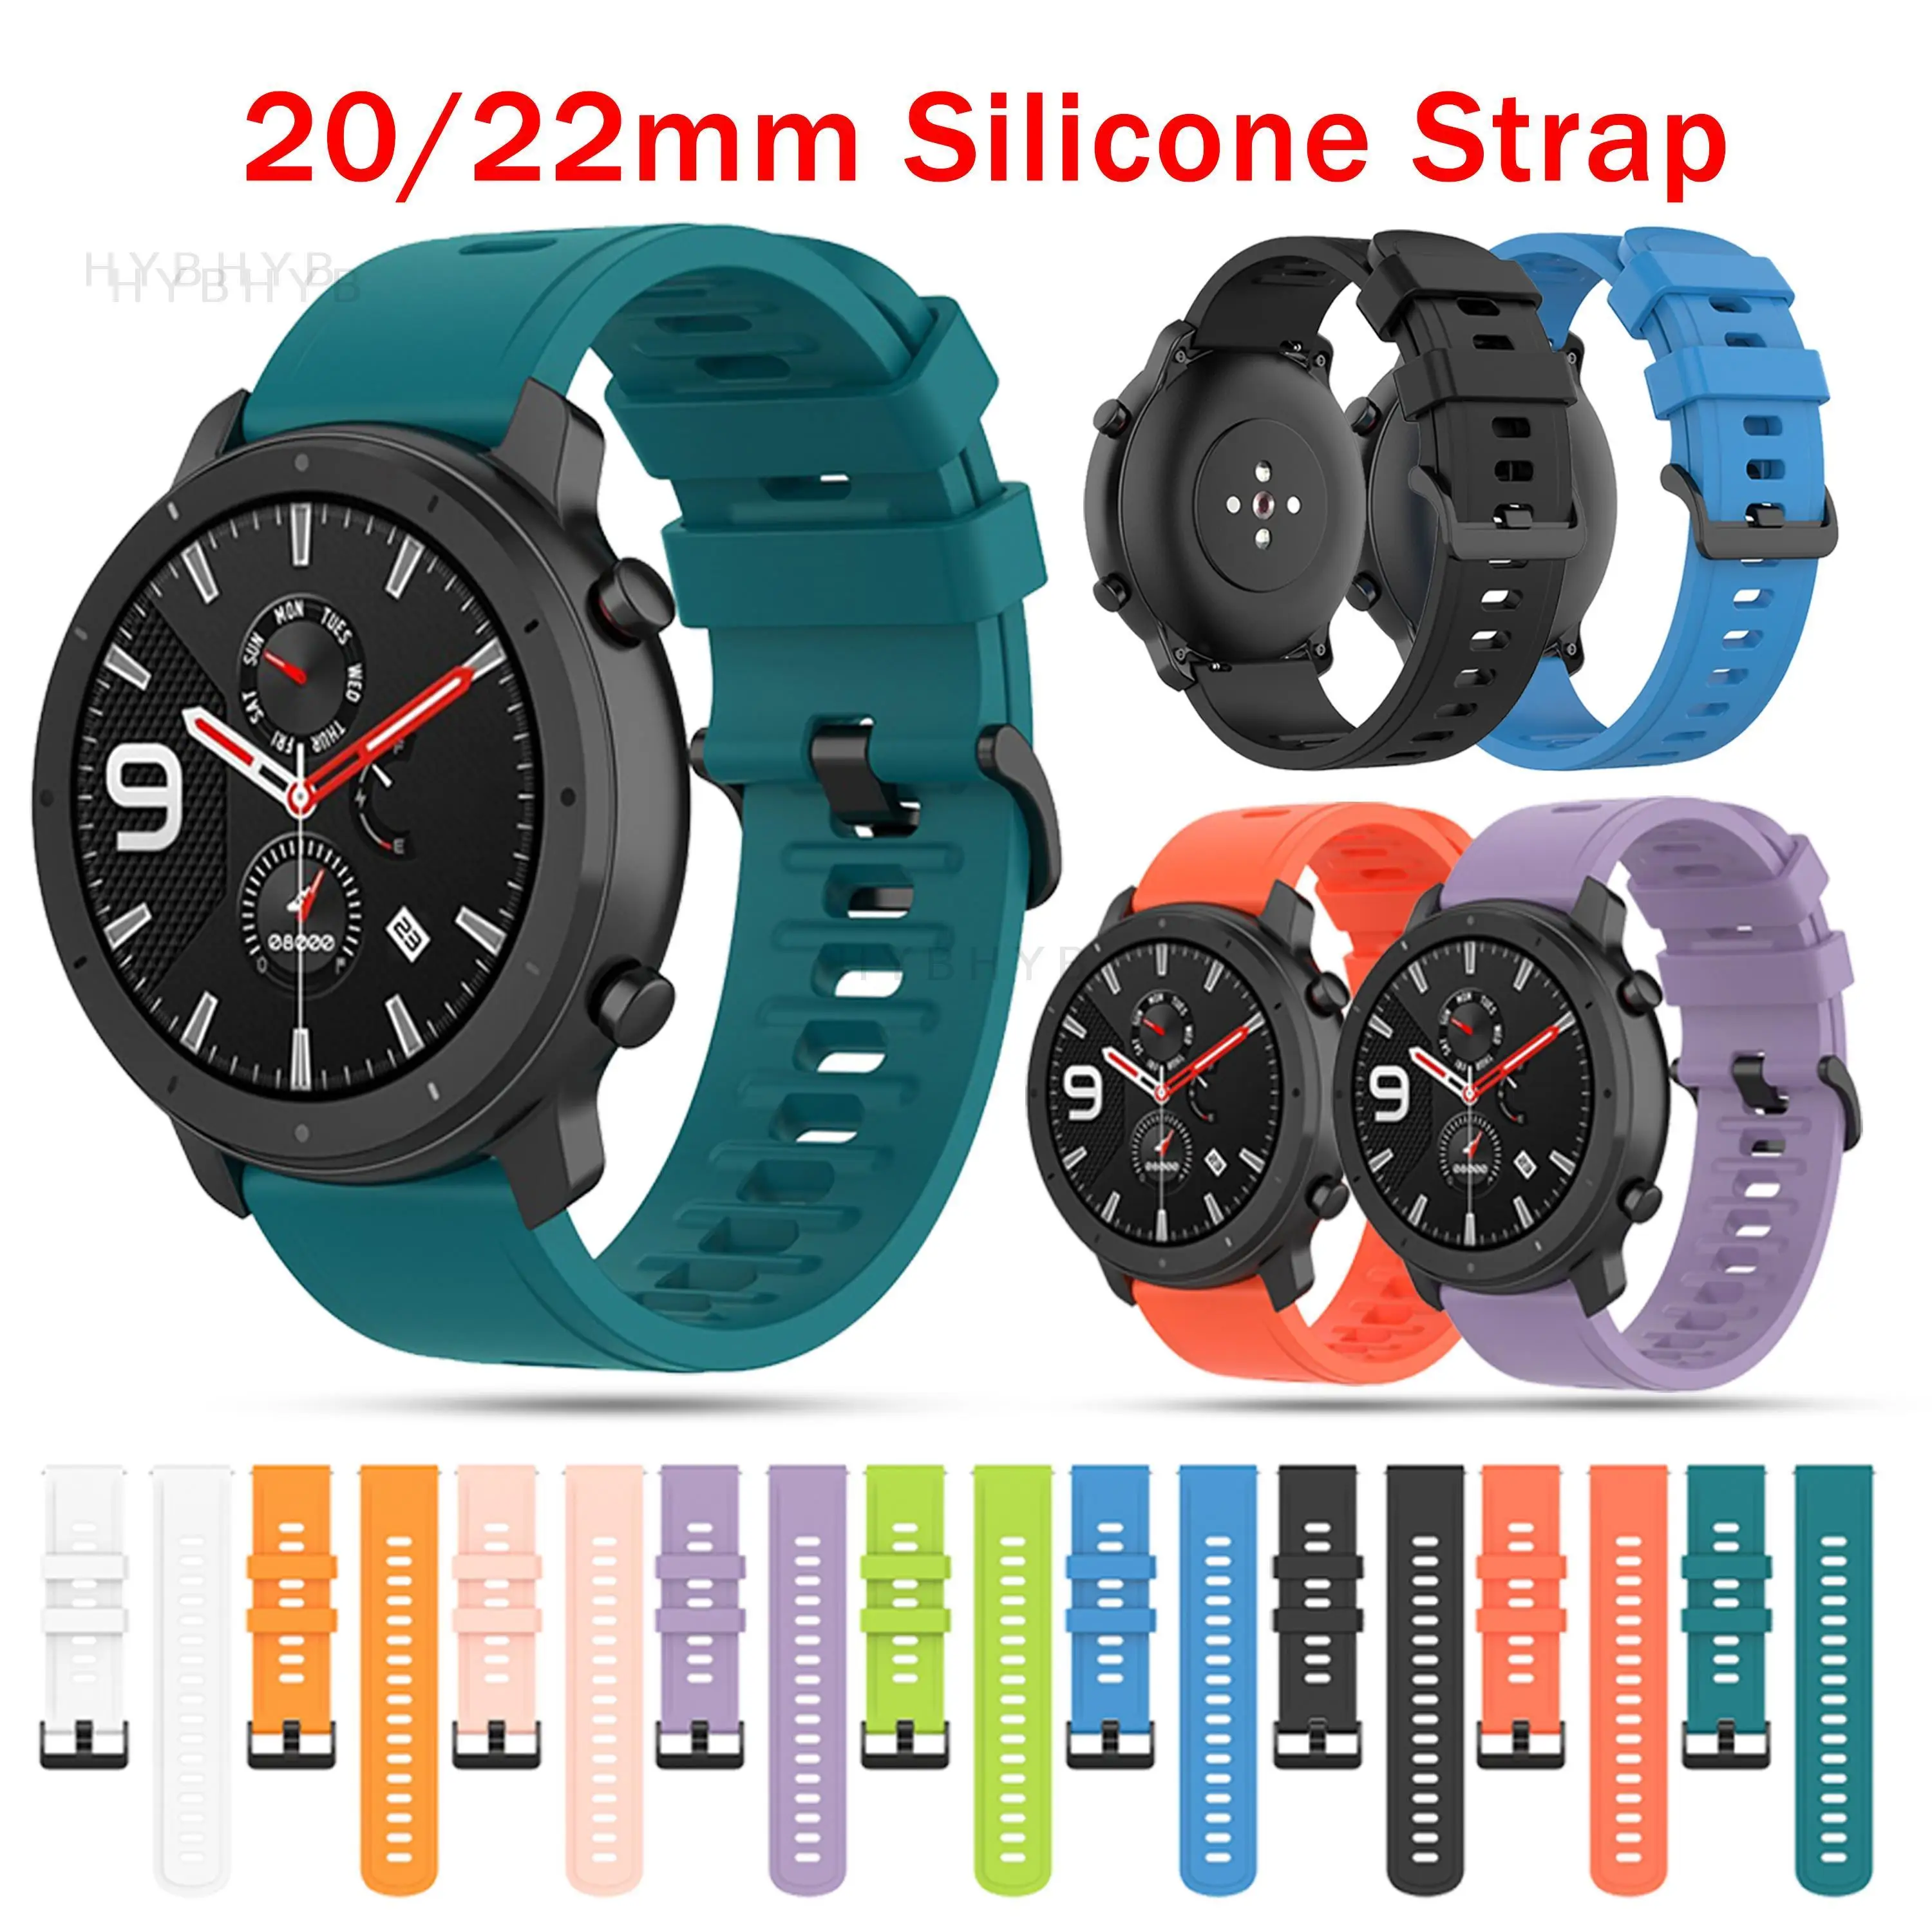 

22MM Soft Silicone Strap For Amazfit GTR 3/Huawei GT2 Pro Smart Watch Band for Huami Amazfit GTR 42MM 20MM Replacement Bracelet